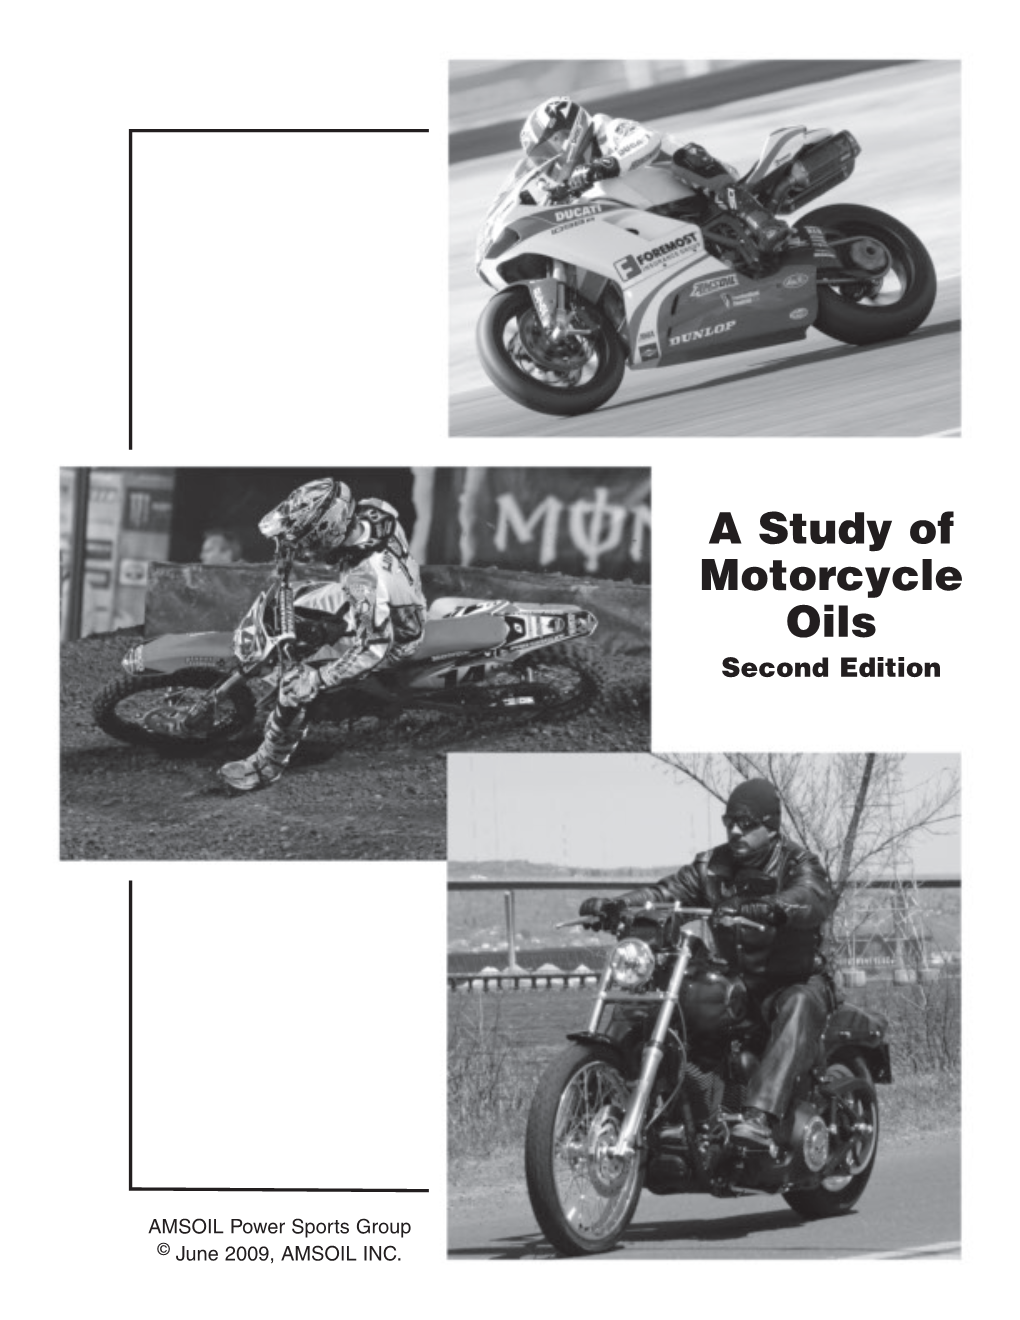 A Study of Motorcycle Oils Second Edition